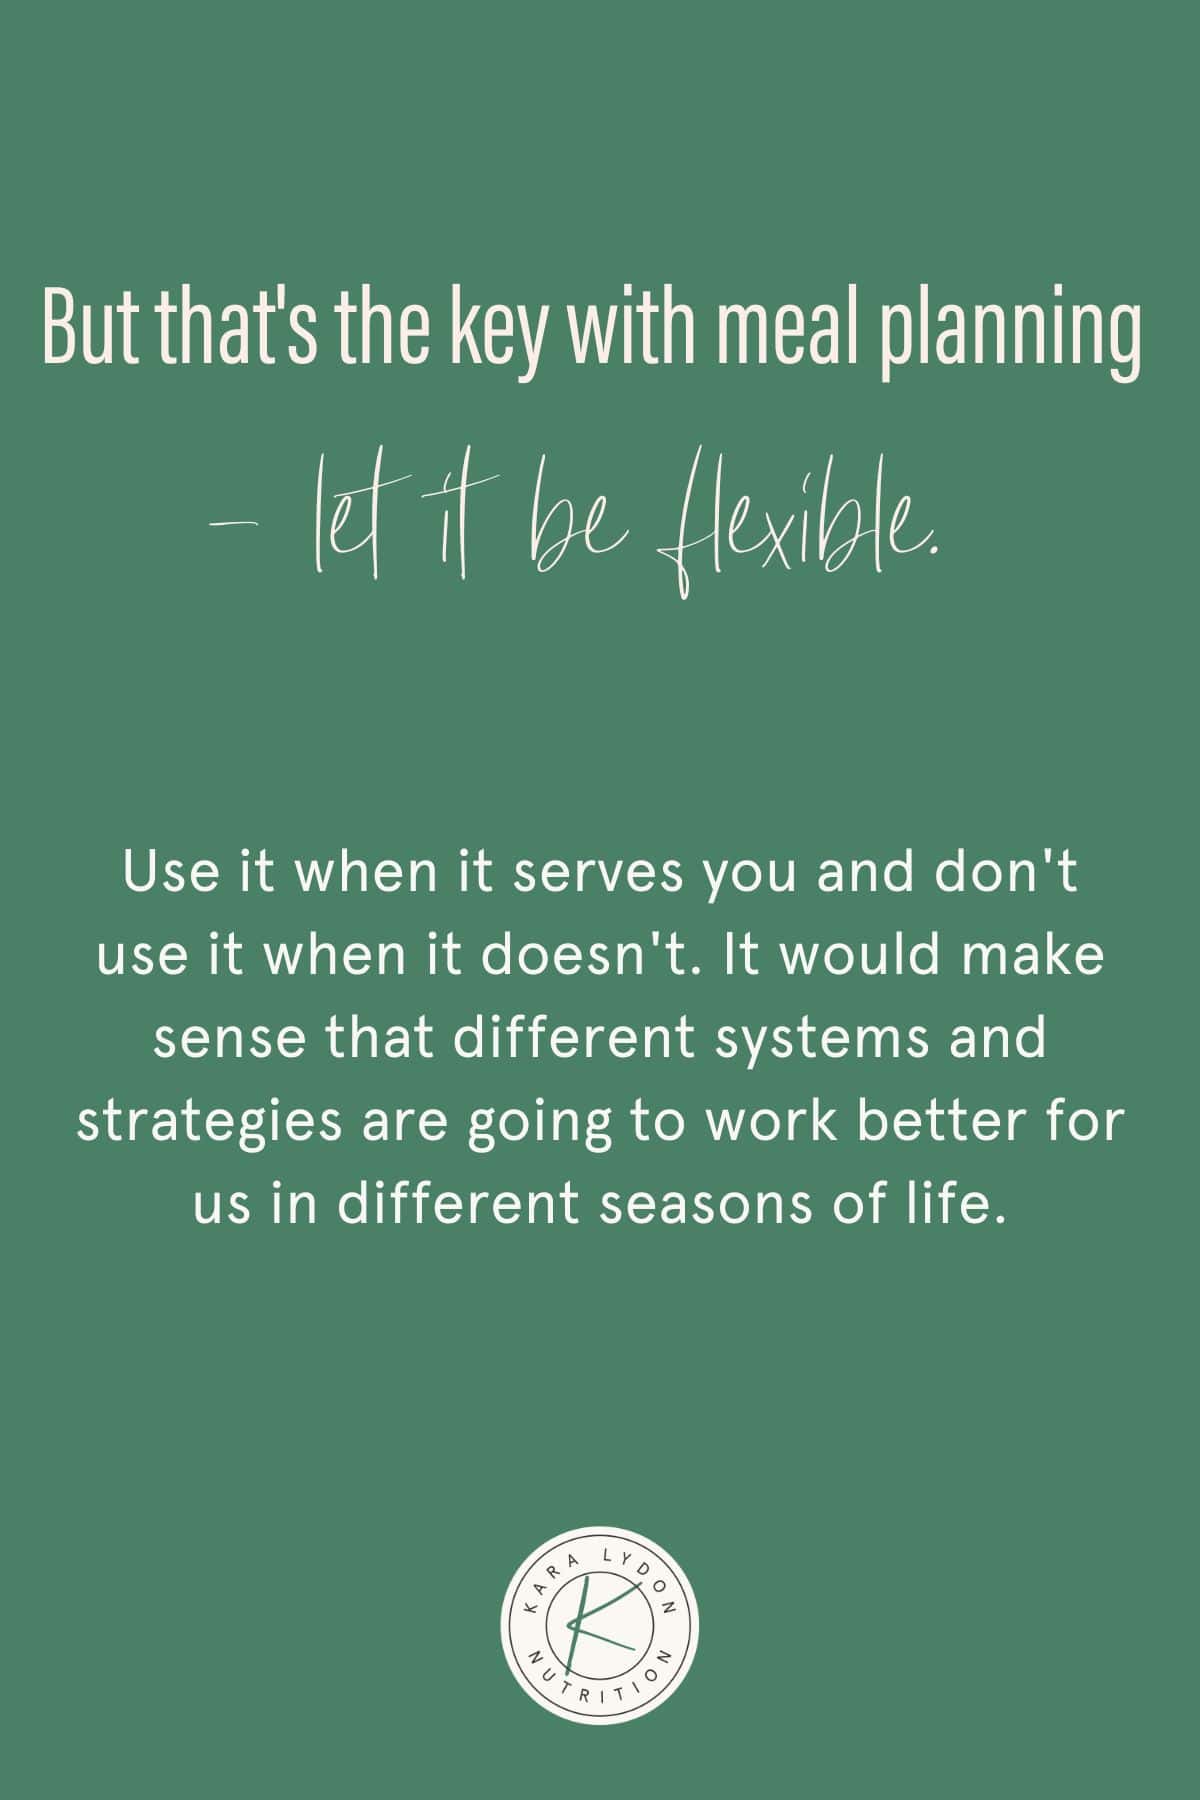 Graphic with quote: "But that's the key when it comes to meal planning: be flexible.  Use it when it works for you and don't use it when it doesn't work for you.  It would make sense that different systems and strategies work better for us at different stages of life."